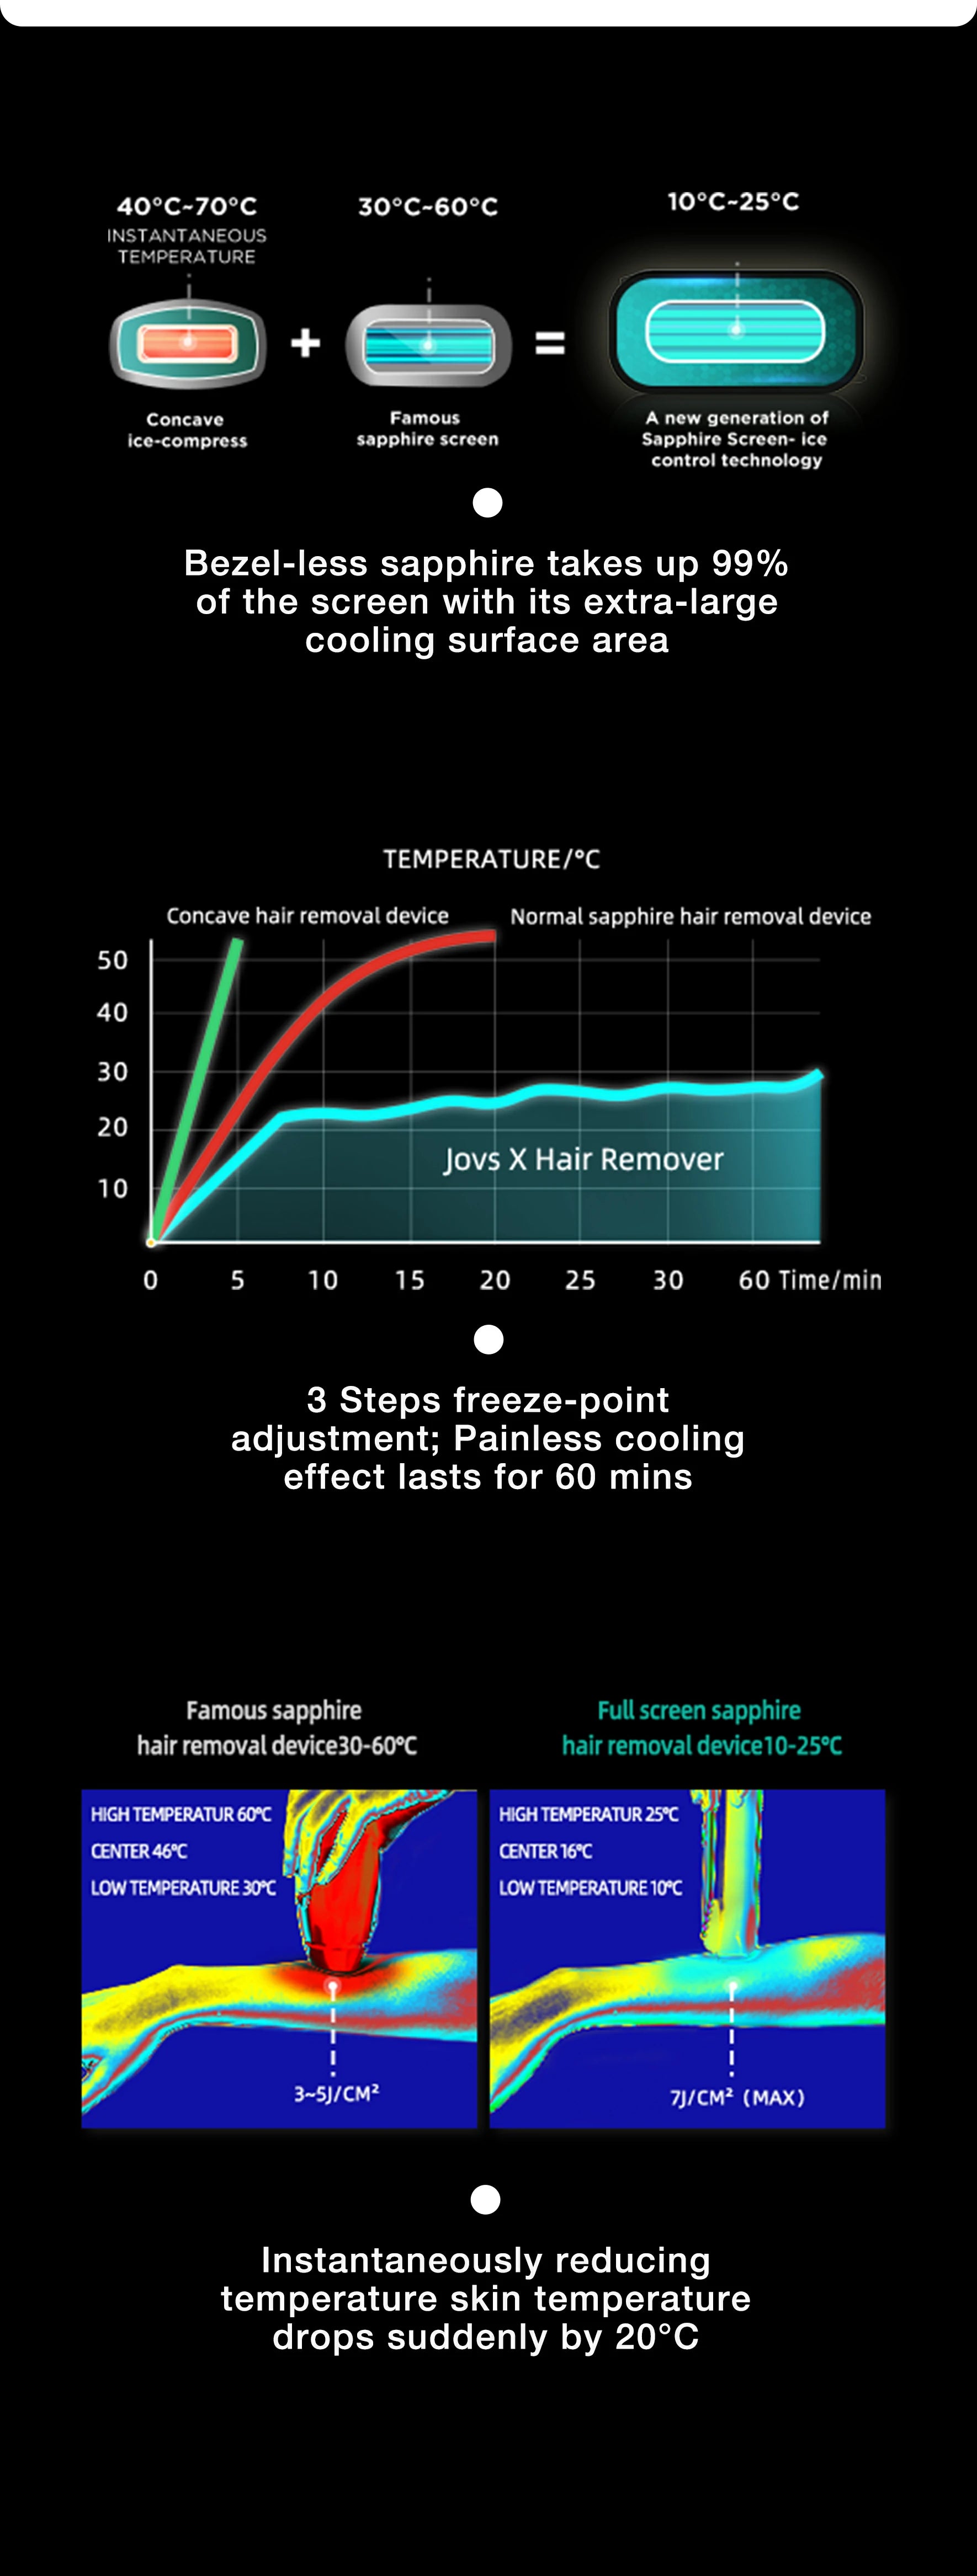 Infographic explaining JOVS X™ hair remover's advanced cooling technology with three-step freeze-point adjustment and thermal images showing temperature reduction.